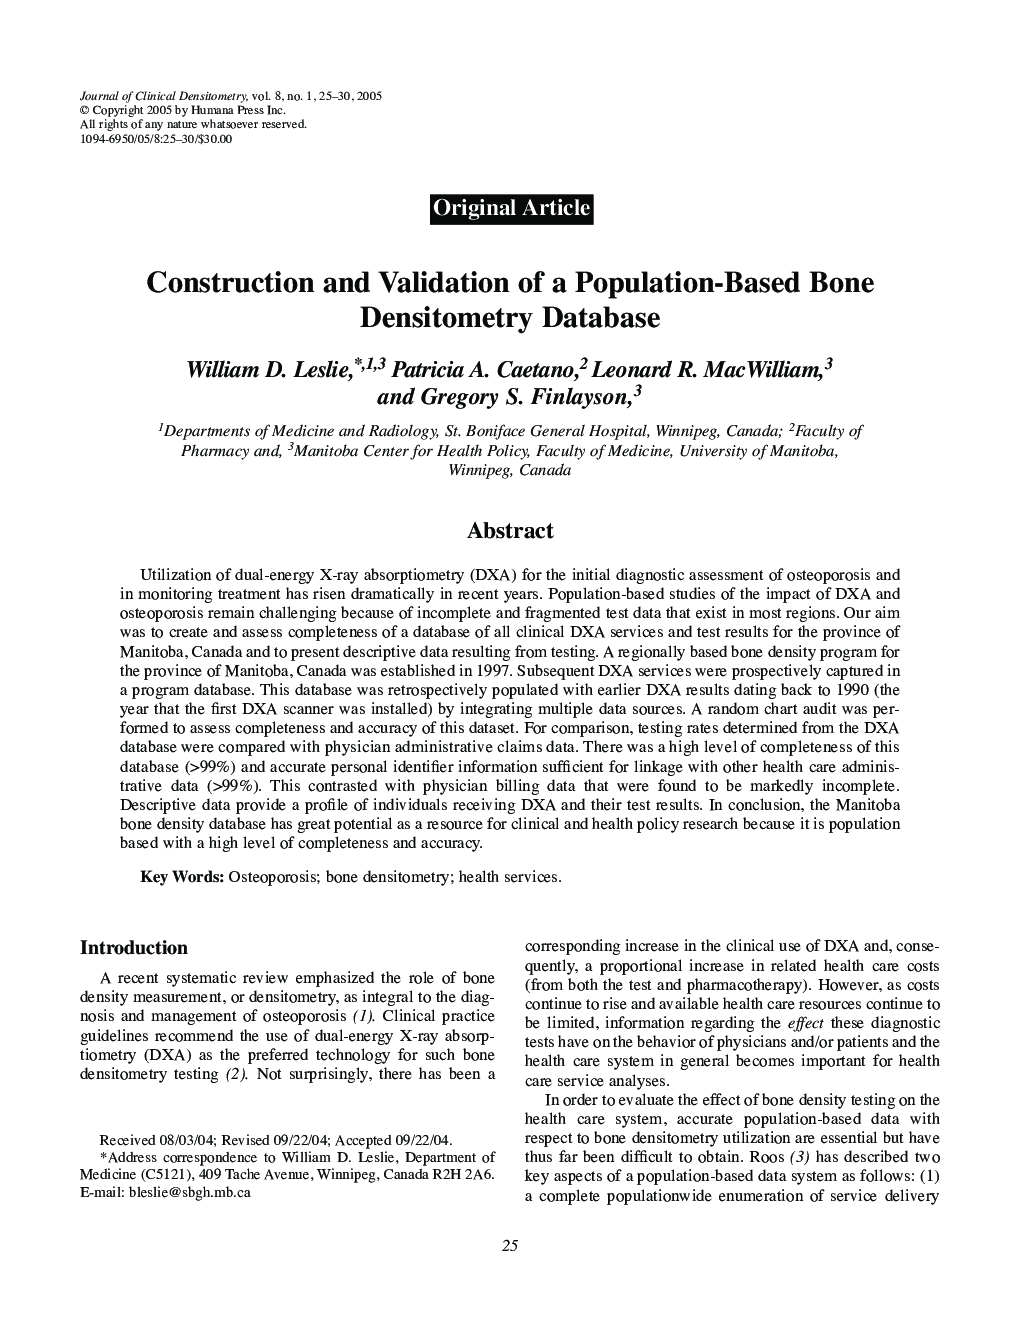 Construction and Validation of a Population-Based Bone Densitometry Database